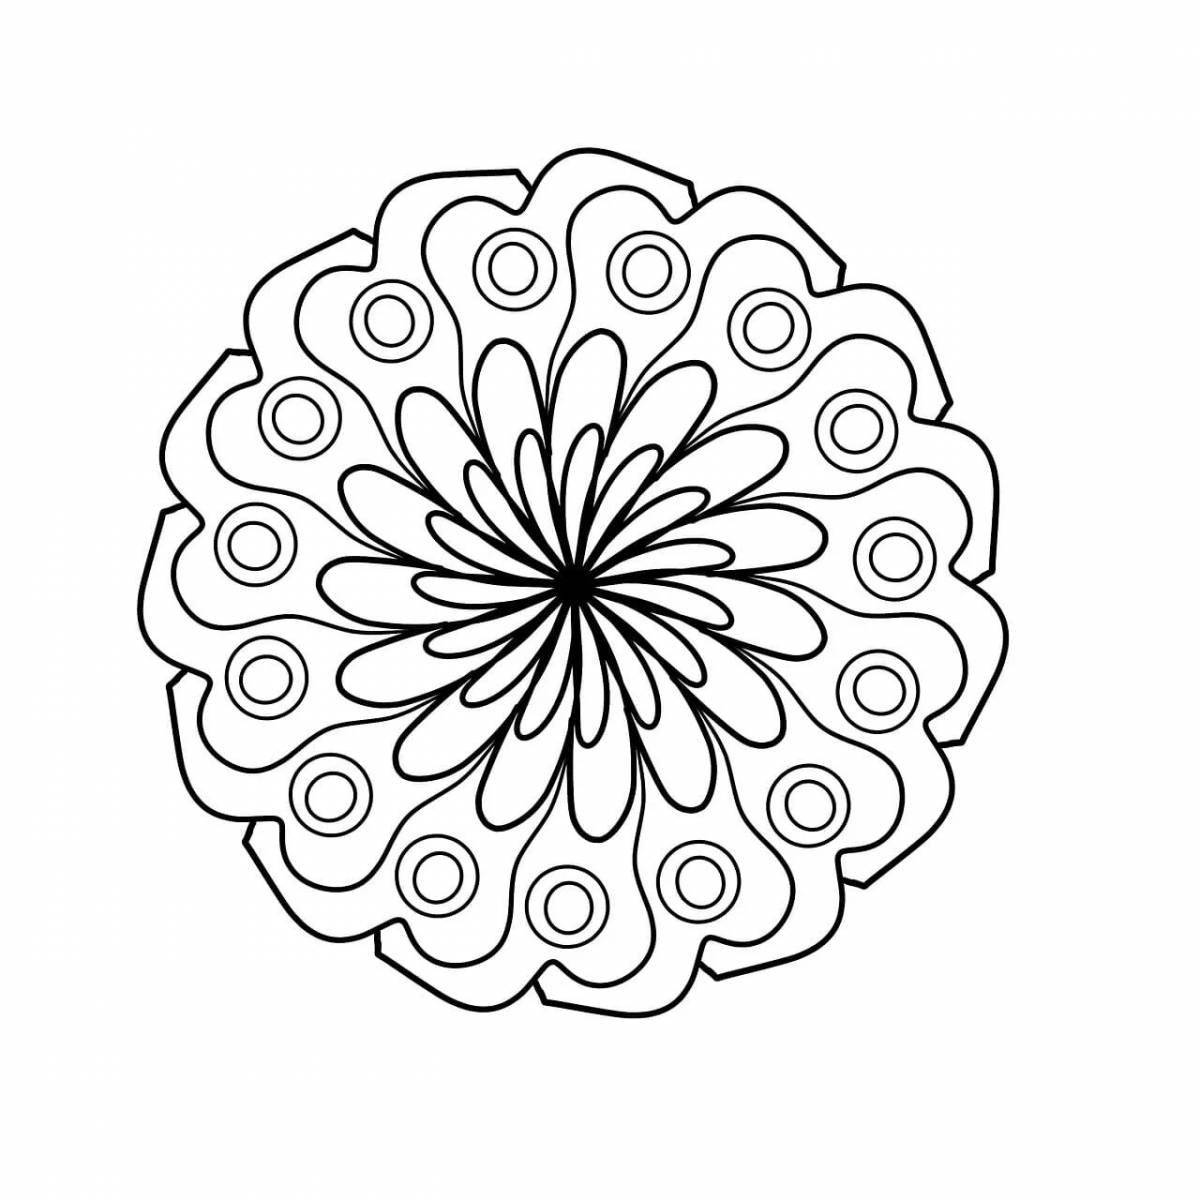 Refreshing coloring book with small patterns